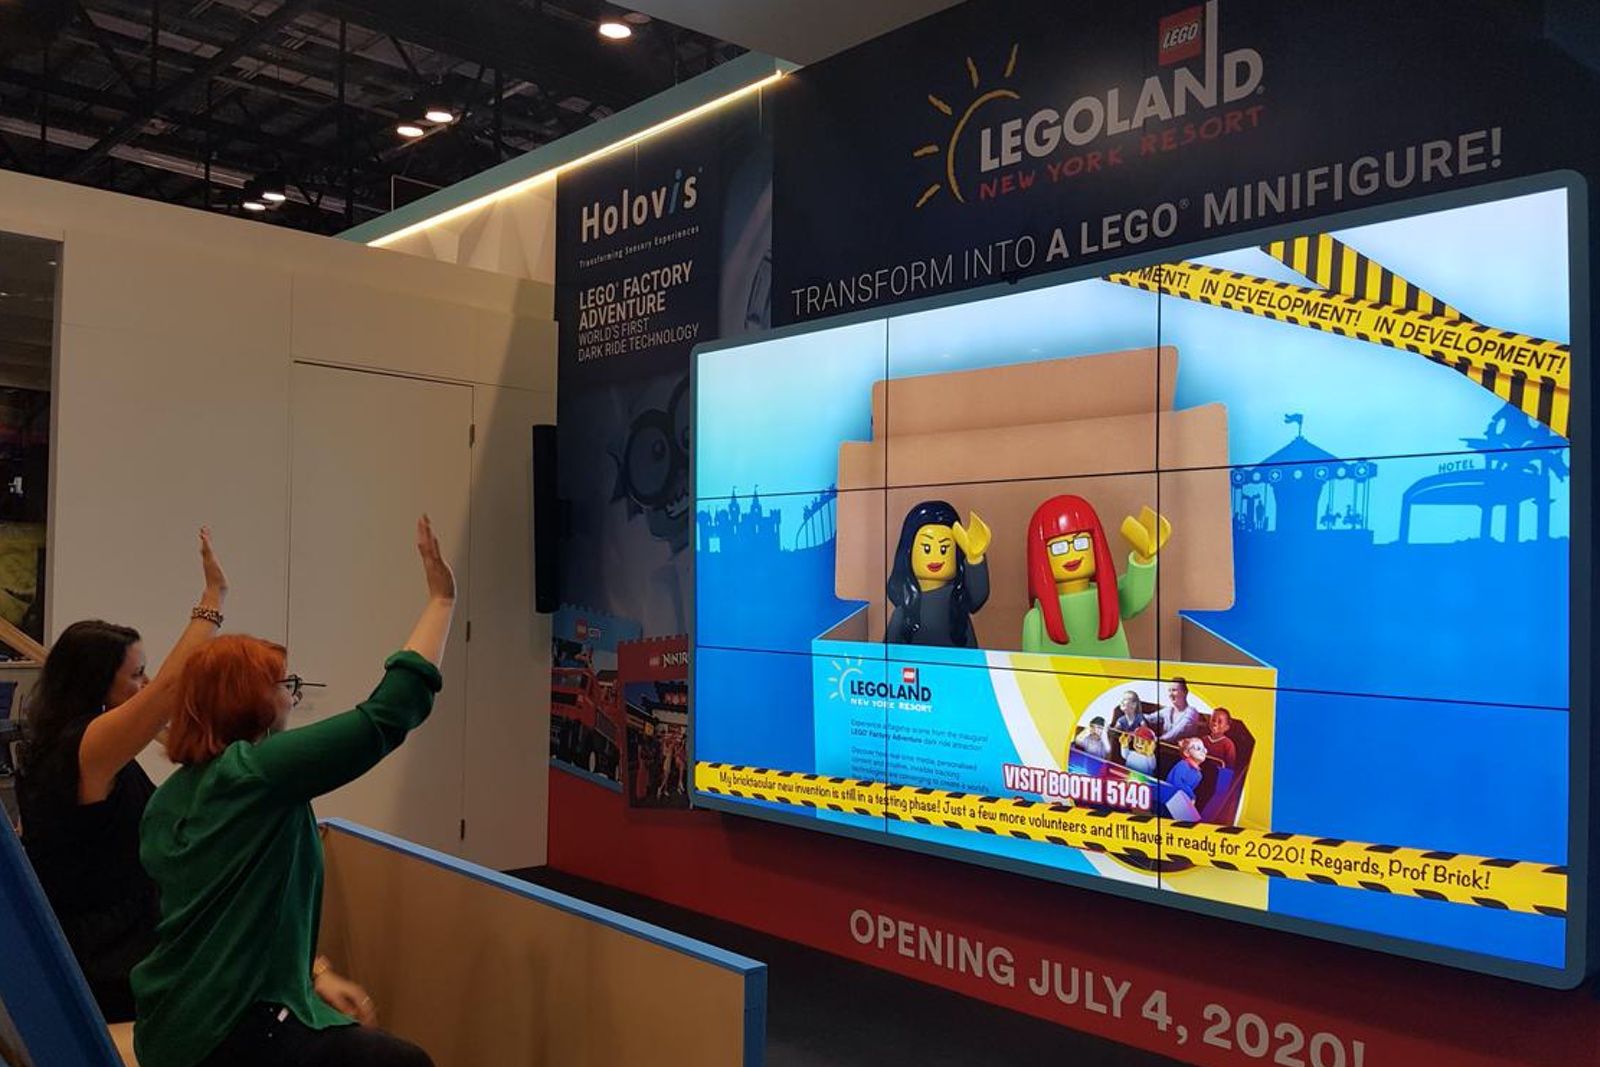 The new Legoland in New York has an AR trick up its sleeve image 1